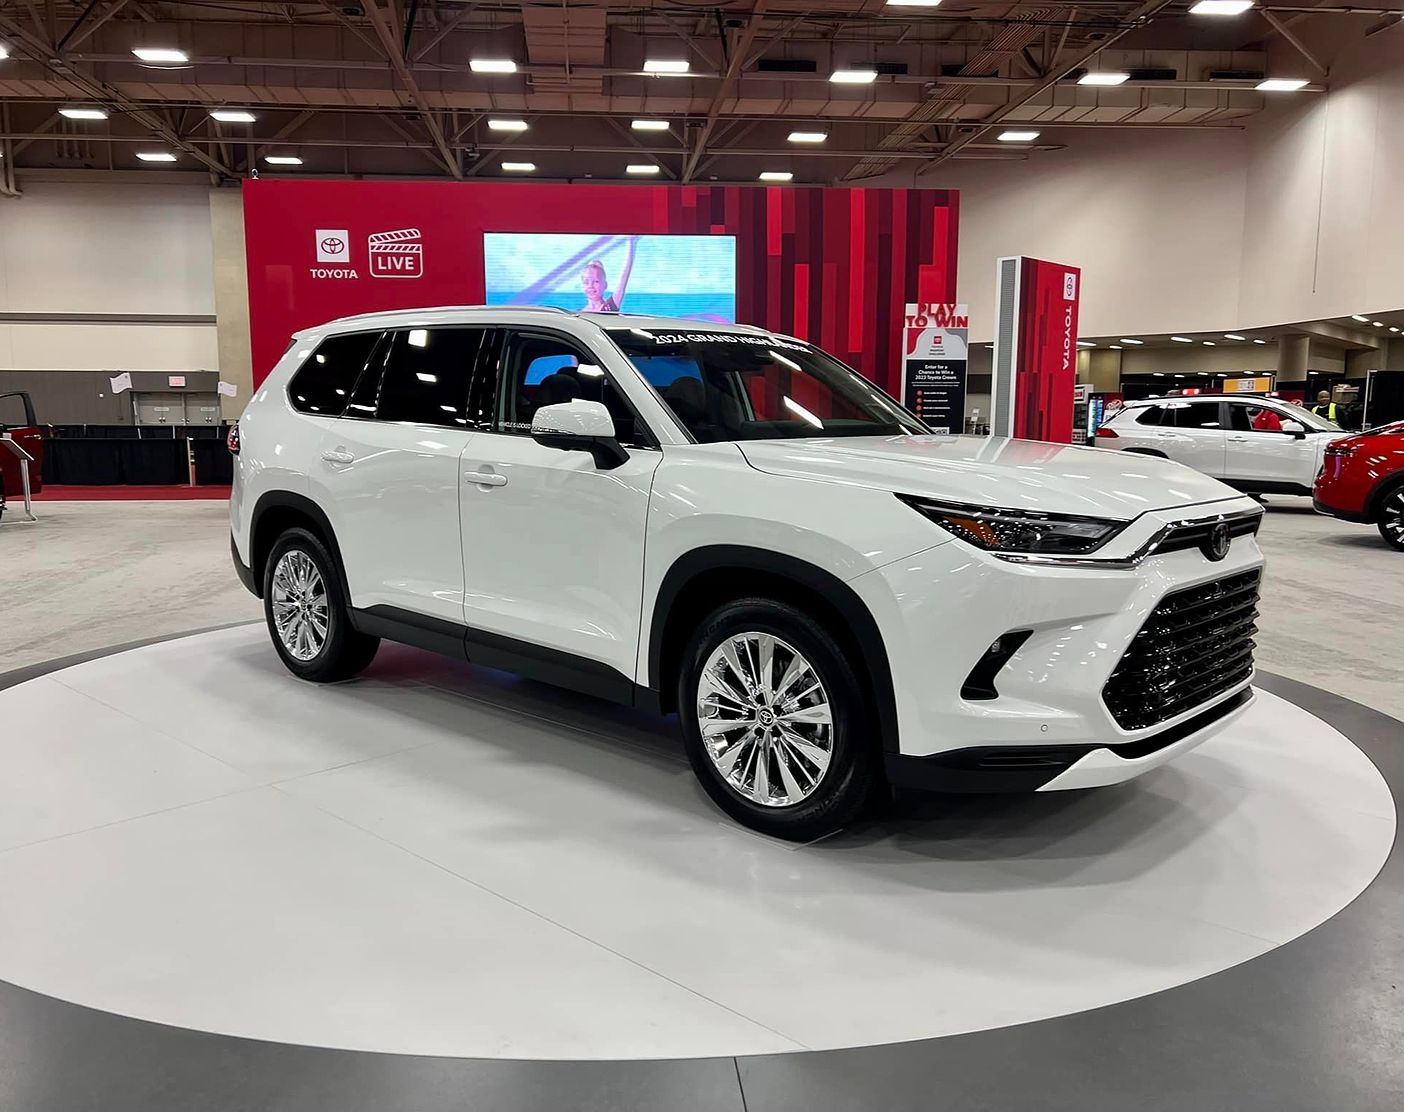 Toyota Highlander Platinum Limited Discover Top 80+ Images And 10 Videos